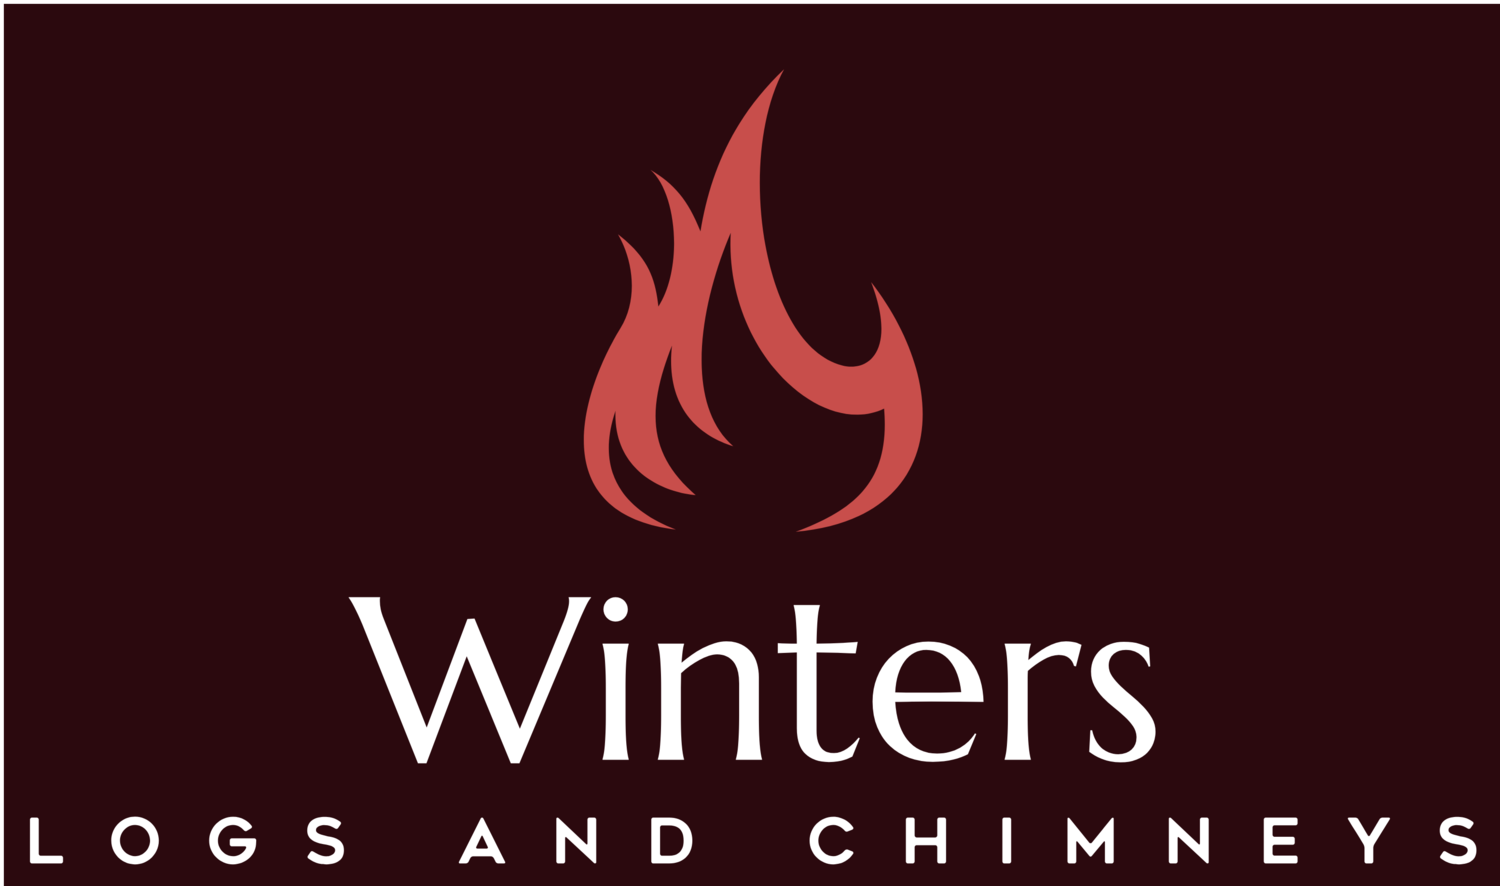 Winters logs and chimneys